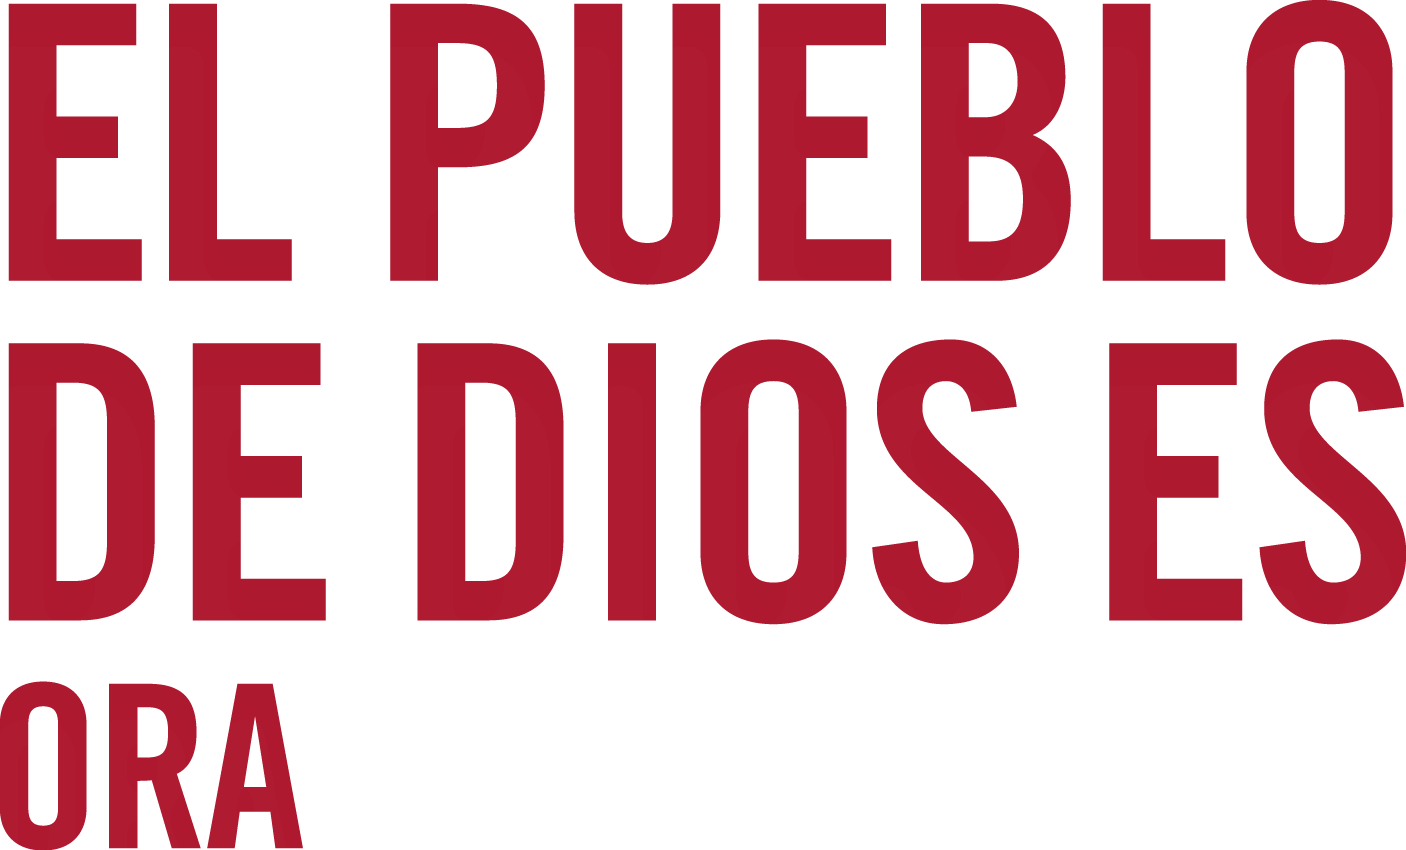 The #BeUMC campaign reminds us of who we are at our best. As people of God called The United Methodist Church, we’re faithful followers of Jesus seeking to make the world a better place. Praying (girl), design asset (Spanish title).